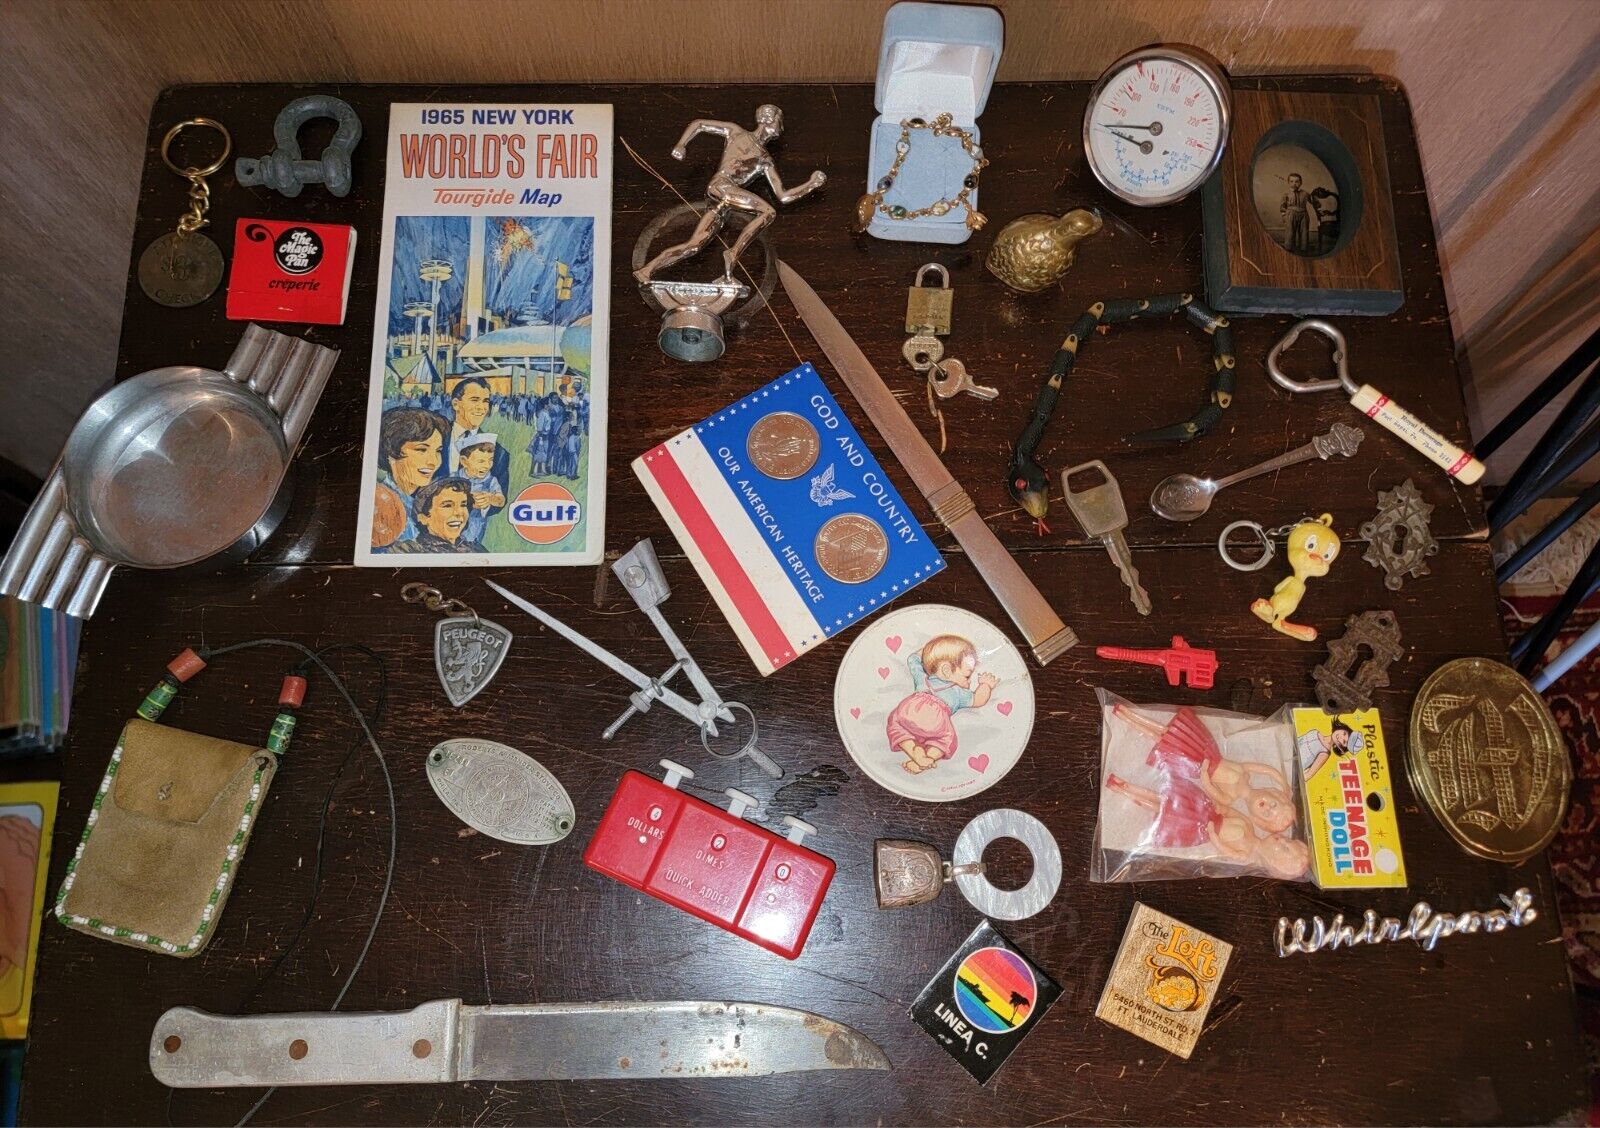 Vintage Junk Drawer Oddities Collectibles Lot Random Estate Finds All Shown